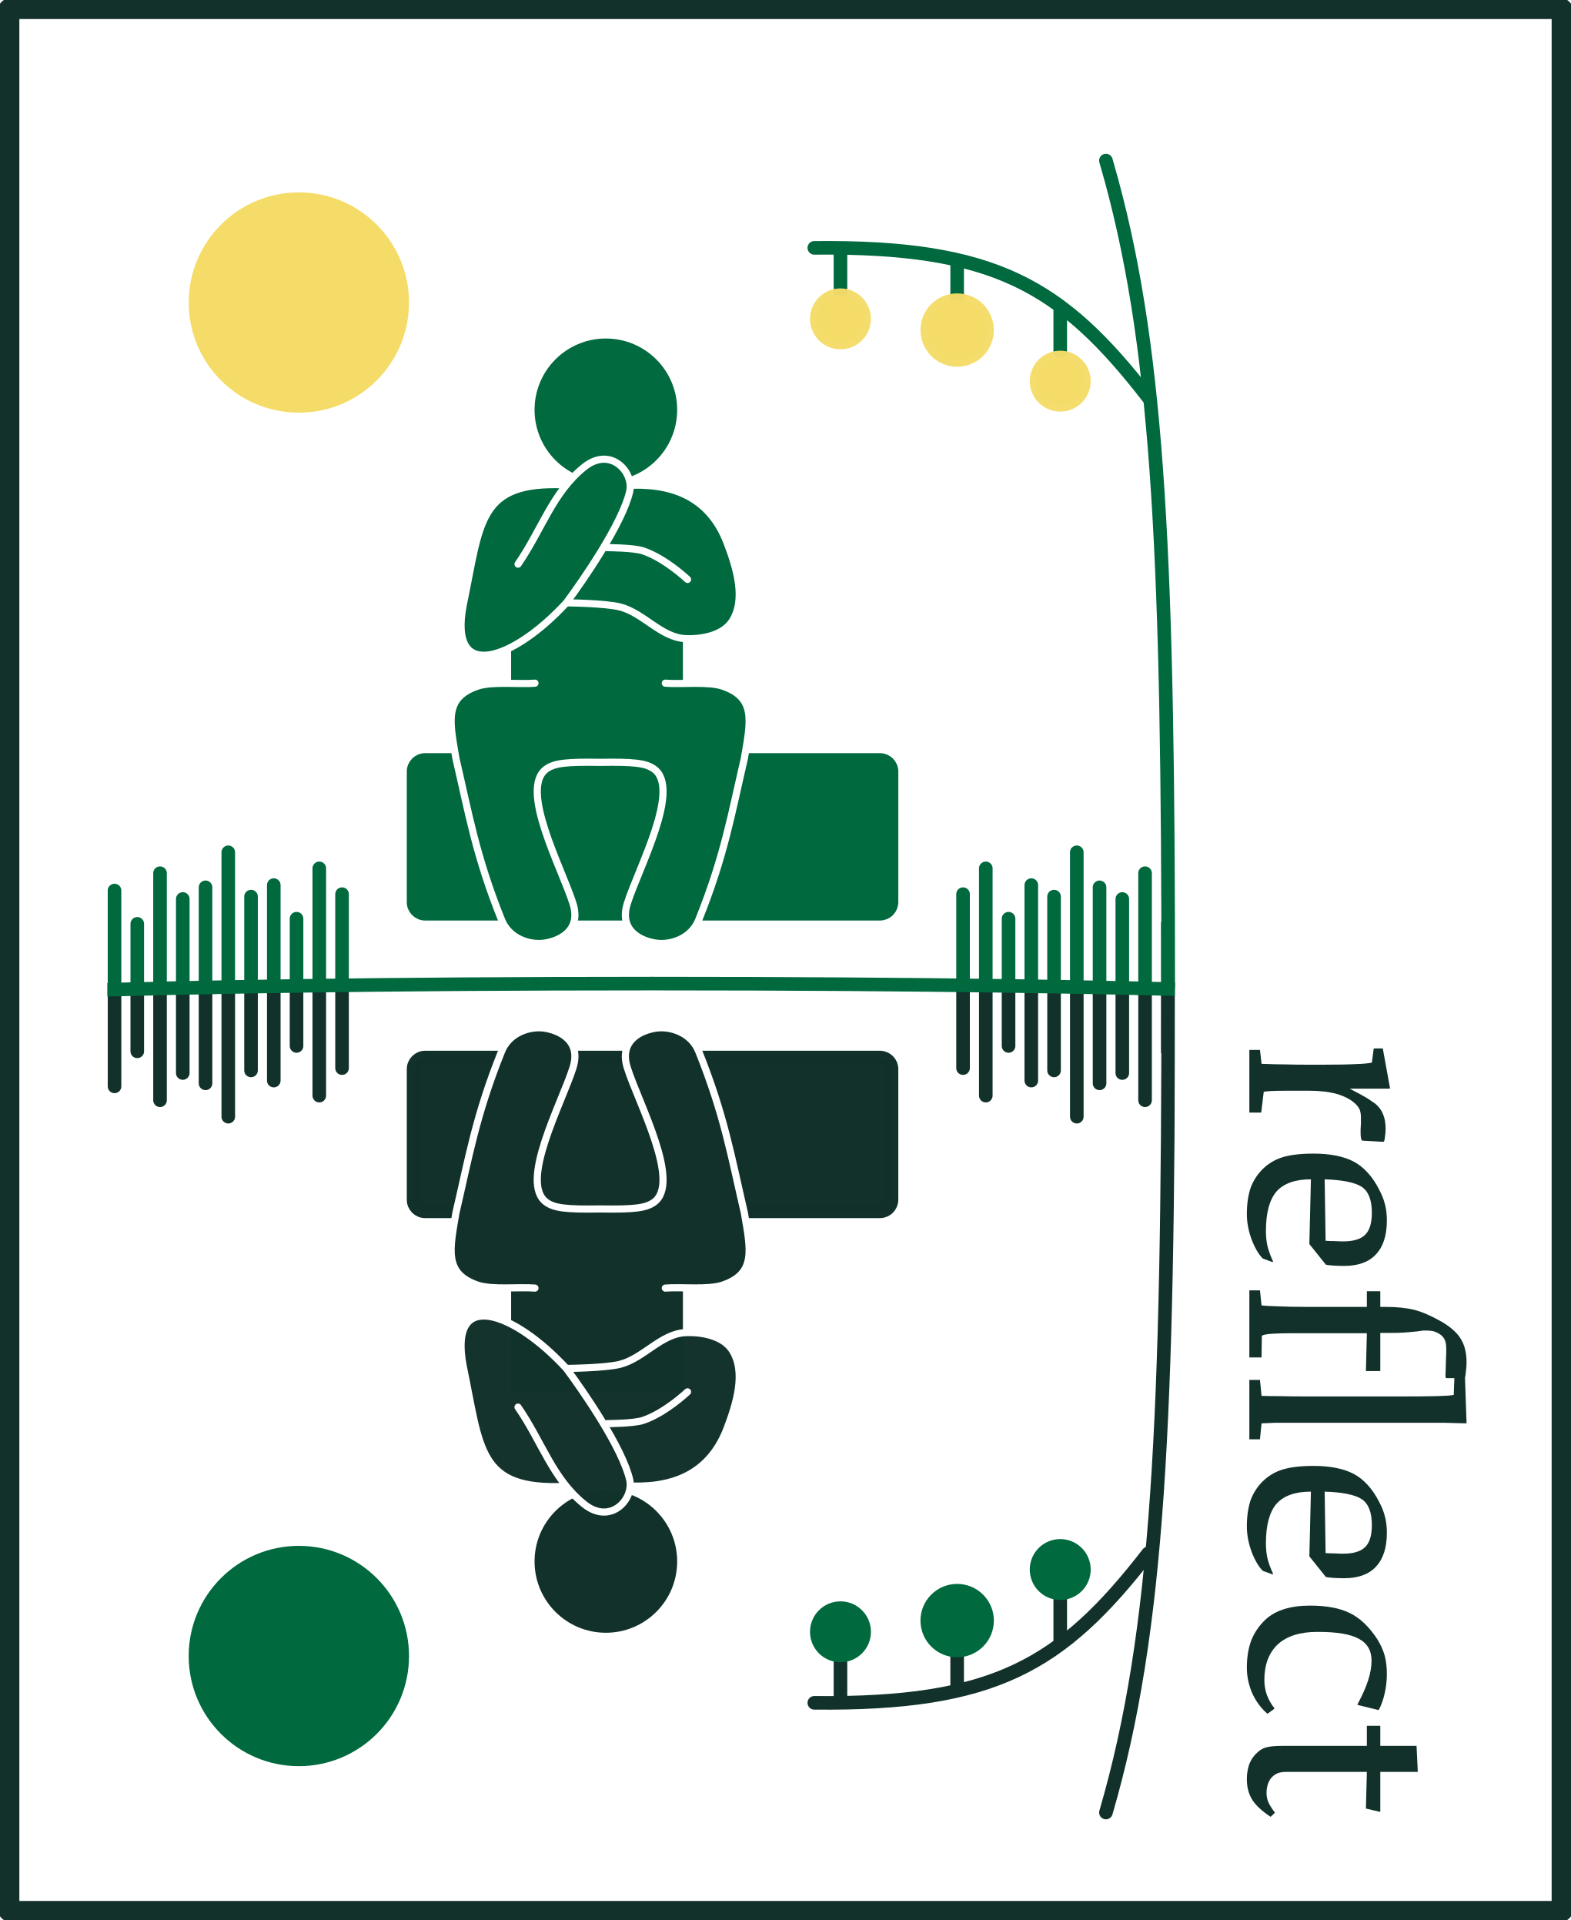 Decorative icon; a seated figure is reflected in water near the word "reflect"